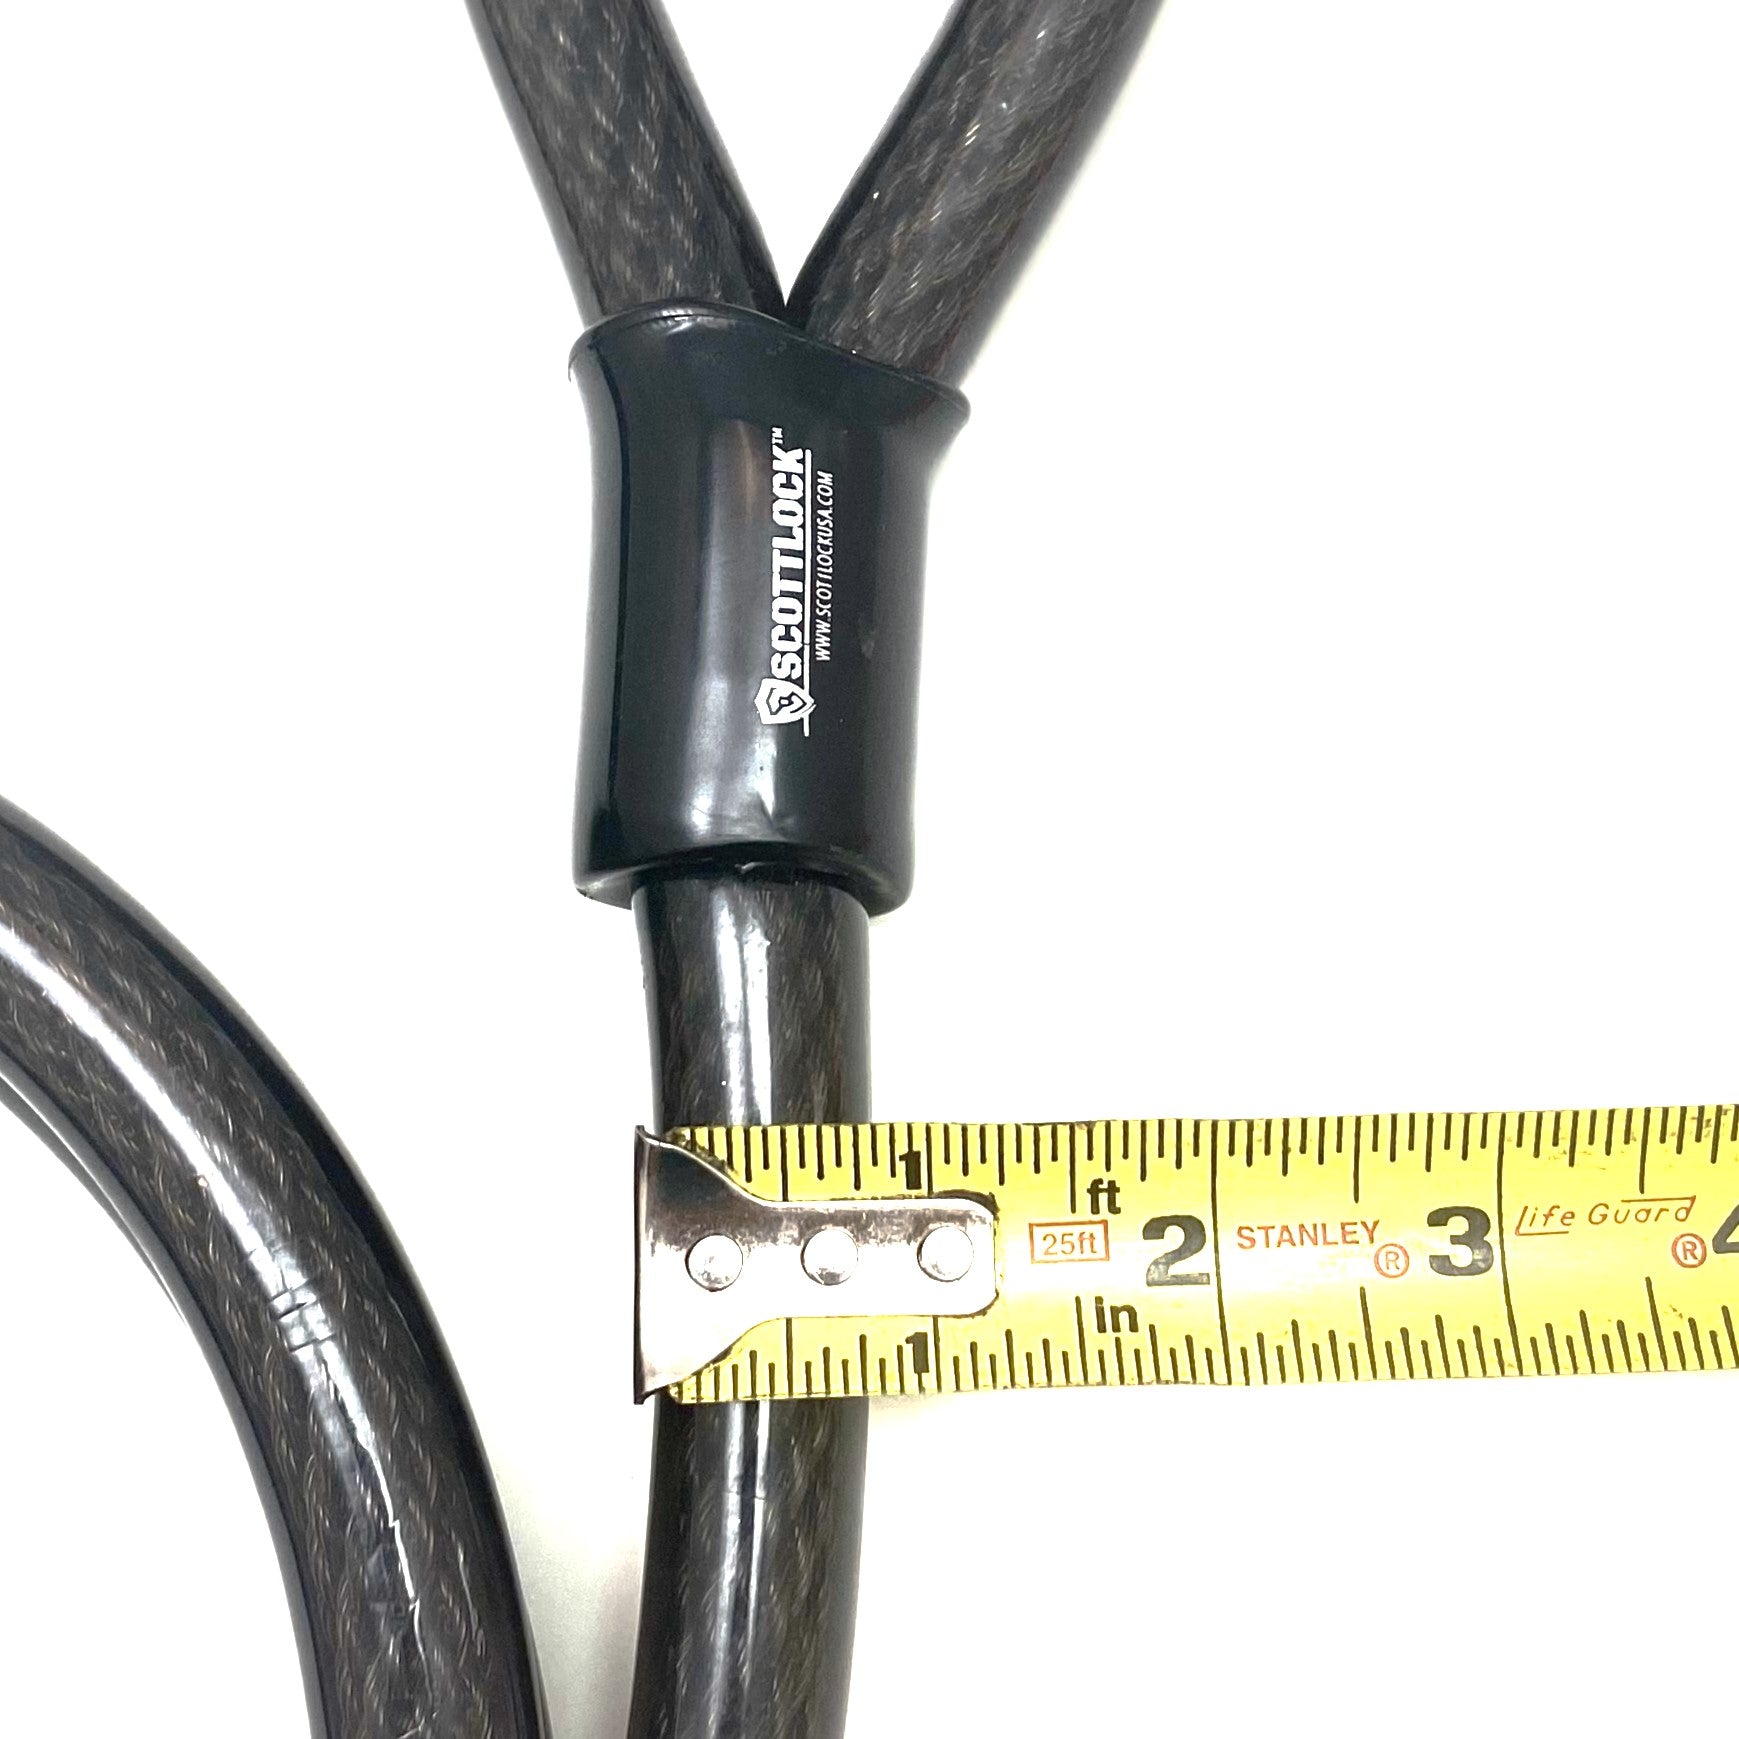  This heavy duty high security steel cable is the largest and strongest dual loop cable on the market!  We could not find it in the US so we had it made specifically for us!  Super thick, 20mm or slightly more then 3/4" --- this is more then twice as thick as traditional security cables. 